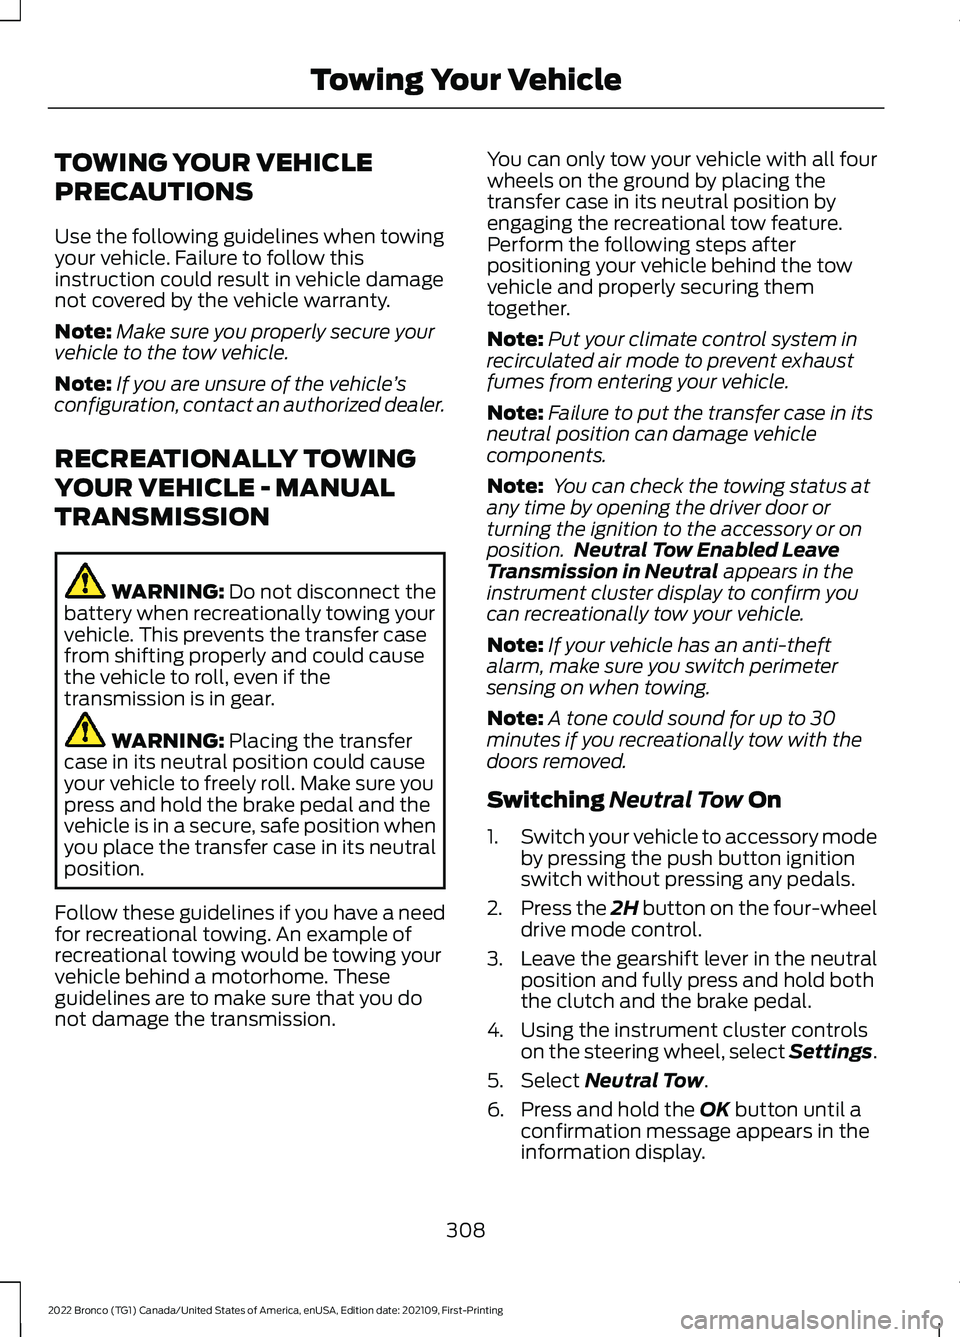 FORD BRONCO 2022 Service Manual TOWING YOUR VEHICLE
PRECAUTIONS
Use the following guidelines when towingyour vehicle. Failure to follow thisinstruction could result in vehicle damagenot covered by the vehicle warranty.
Note:Make sur